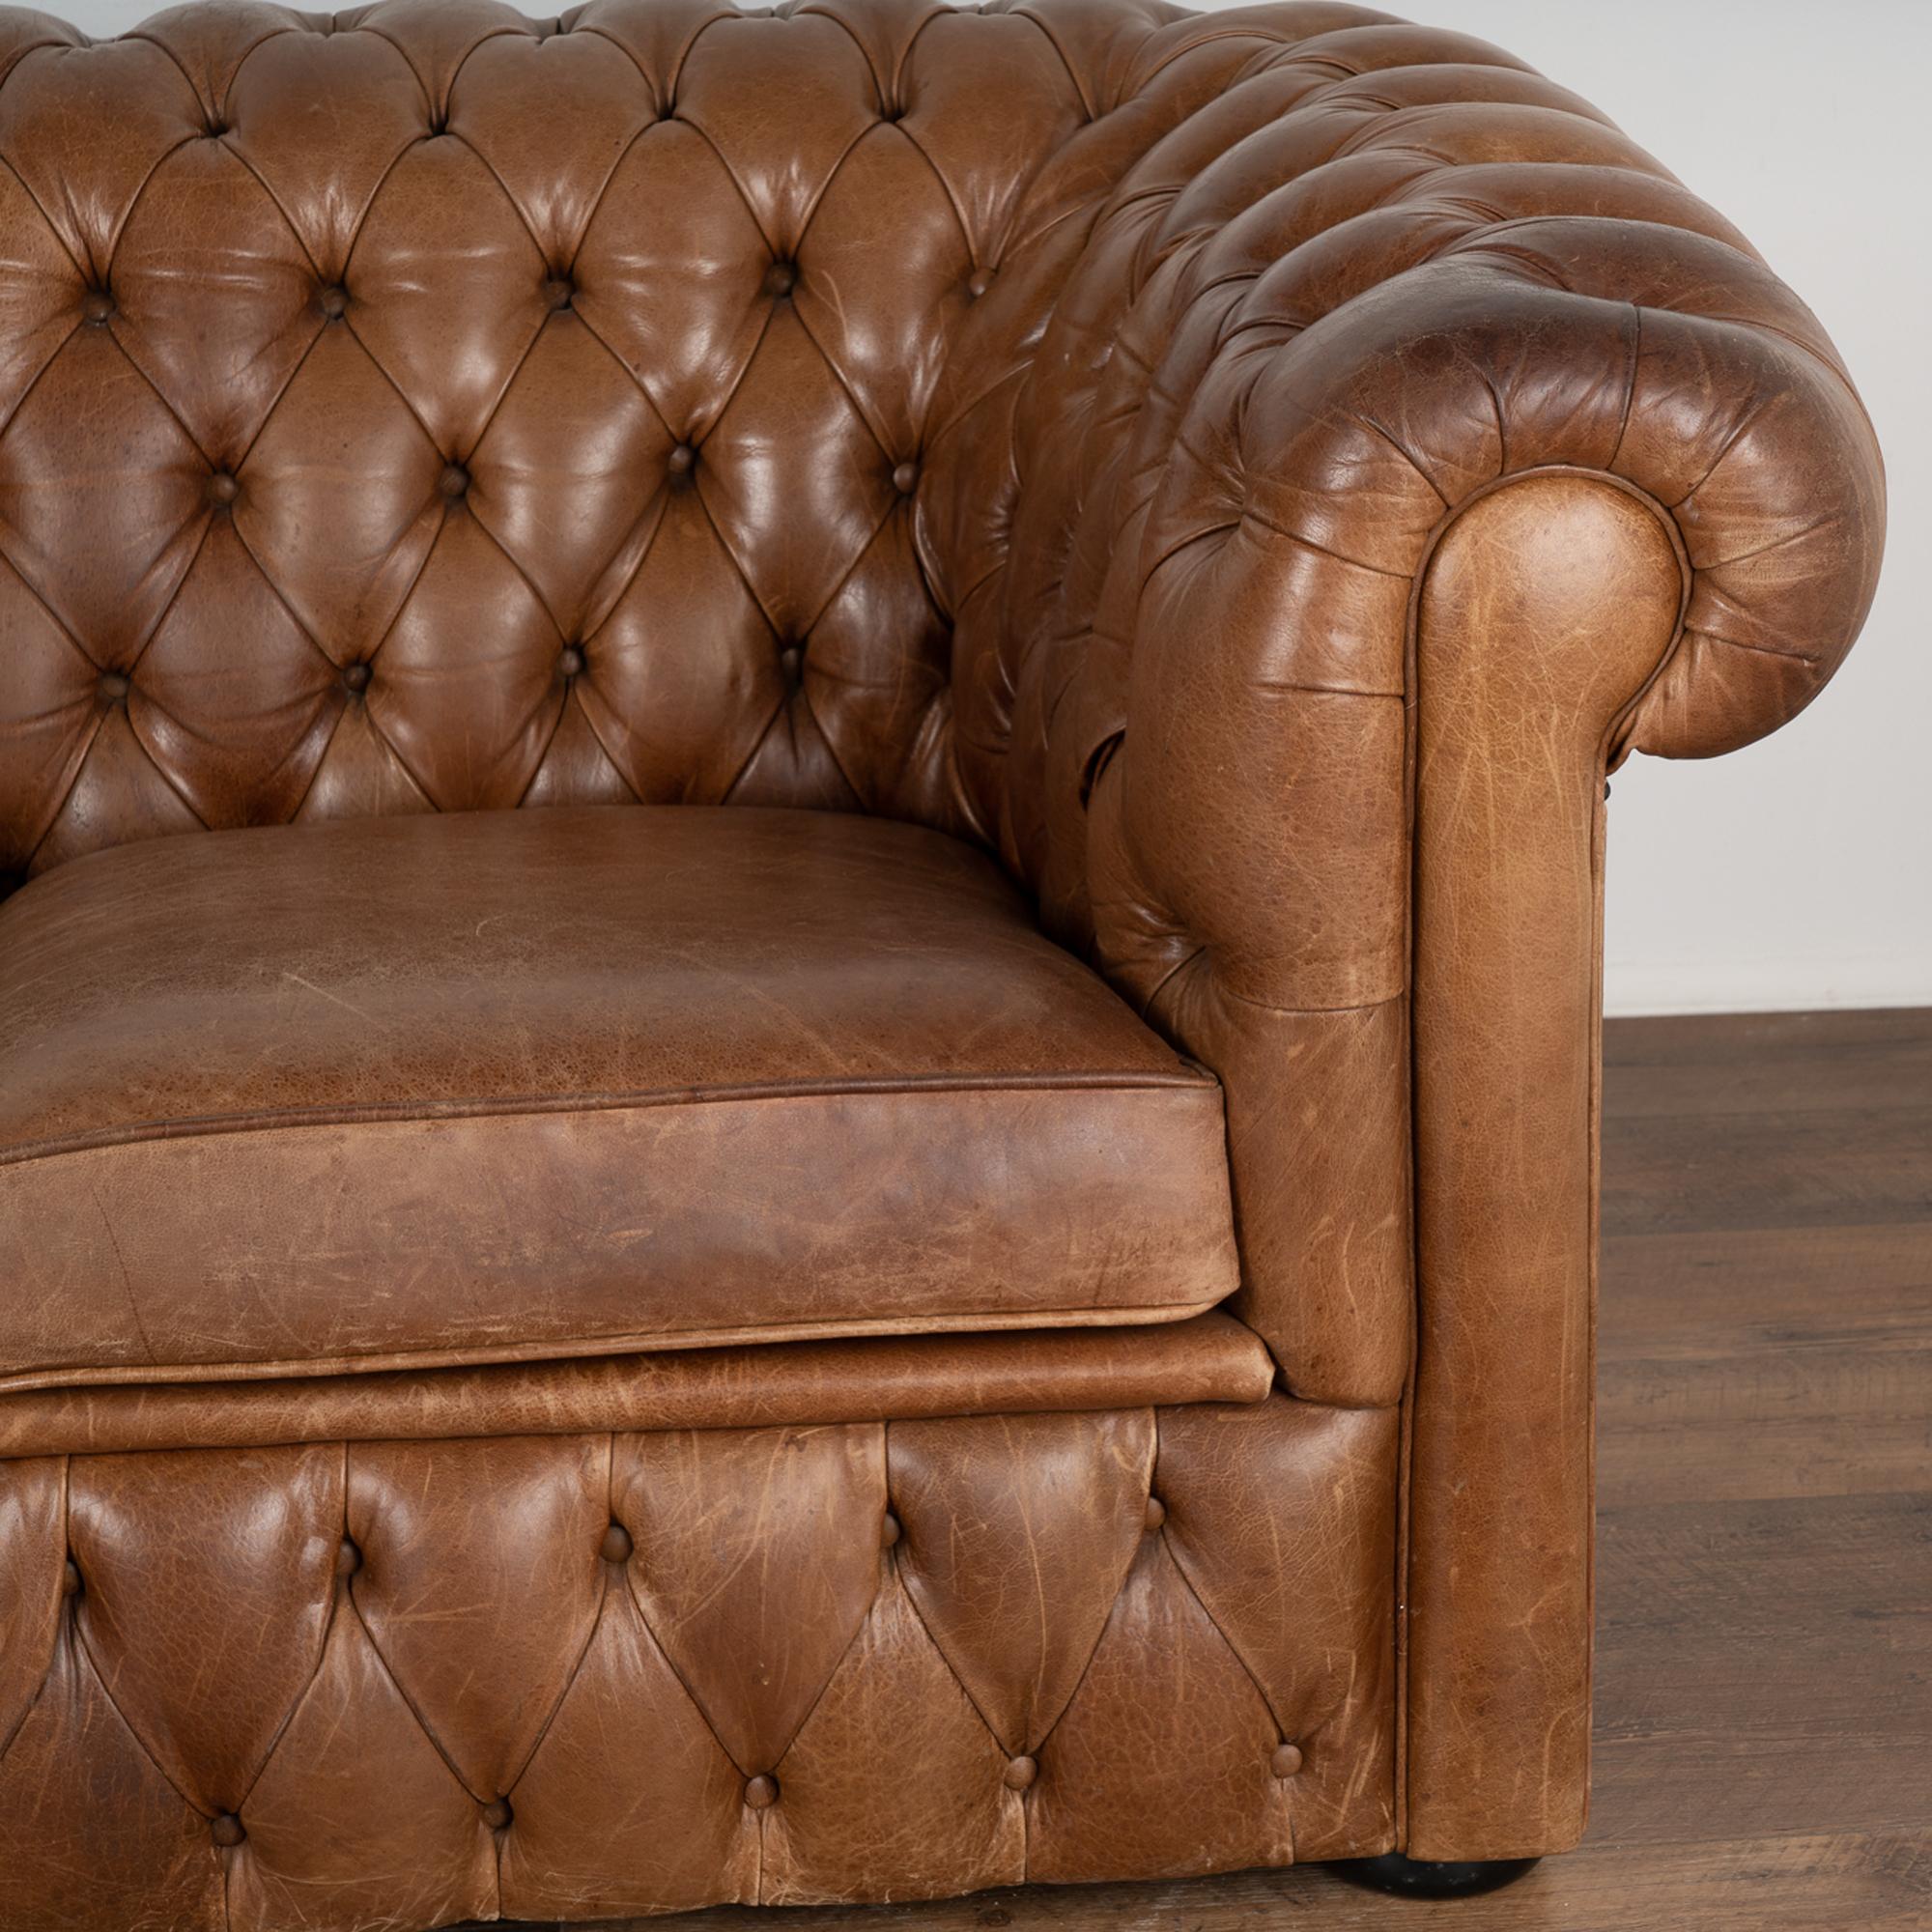 Vintage Brown Leather Three Seat Chesterfield Sofa, Denmark circa 1960-70 For Sale 4